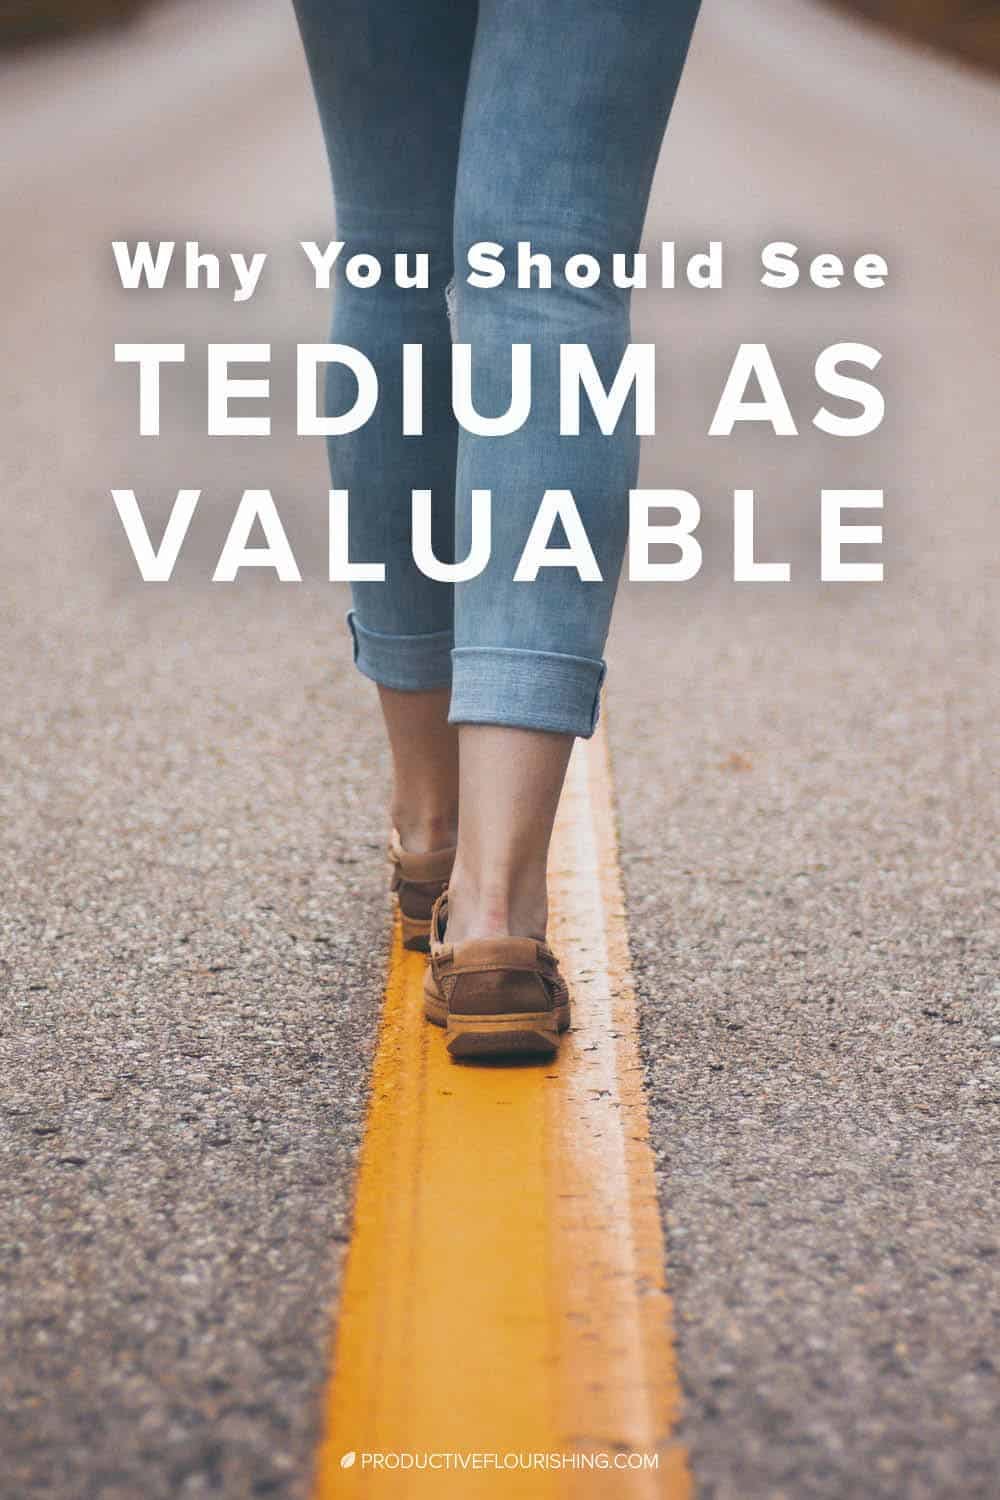 Find out why tedium can be valuable in project management. Small businesses can benefit from using the tedious times in projects in four ways. Look for connections and patterns in the slow times. #entrepreneurship #projectmanagement #productiveflourishing